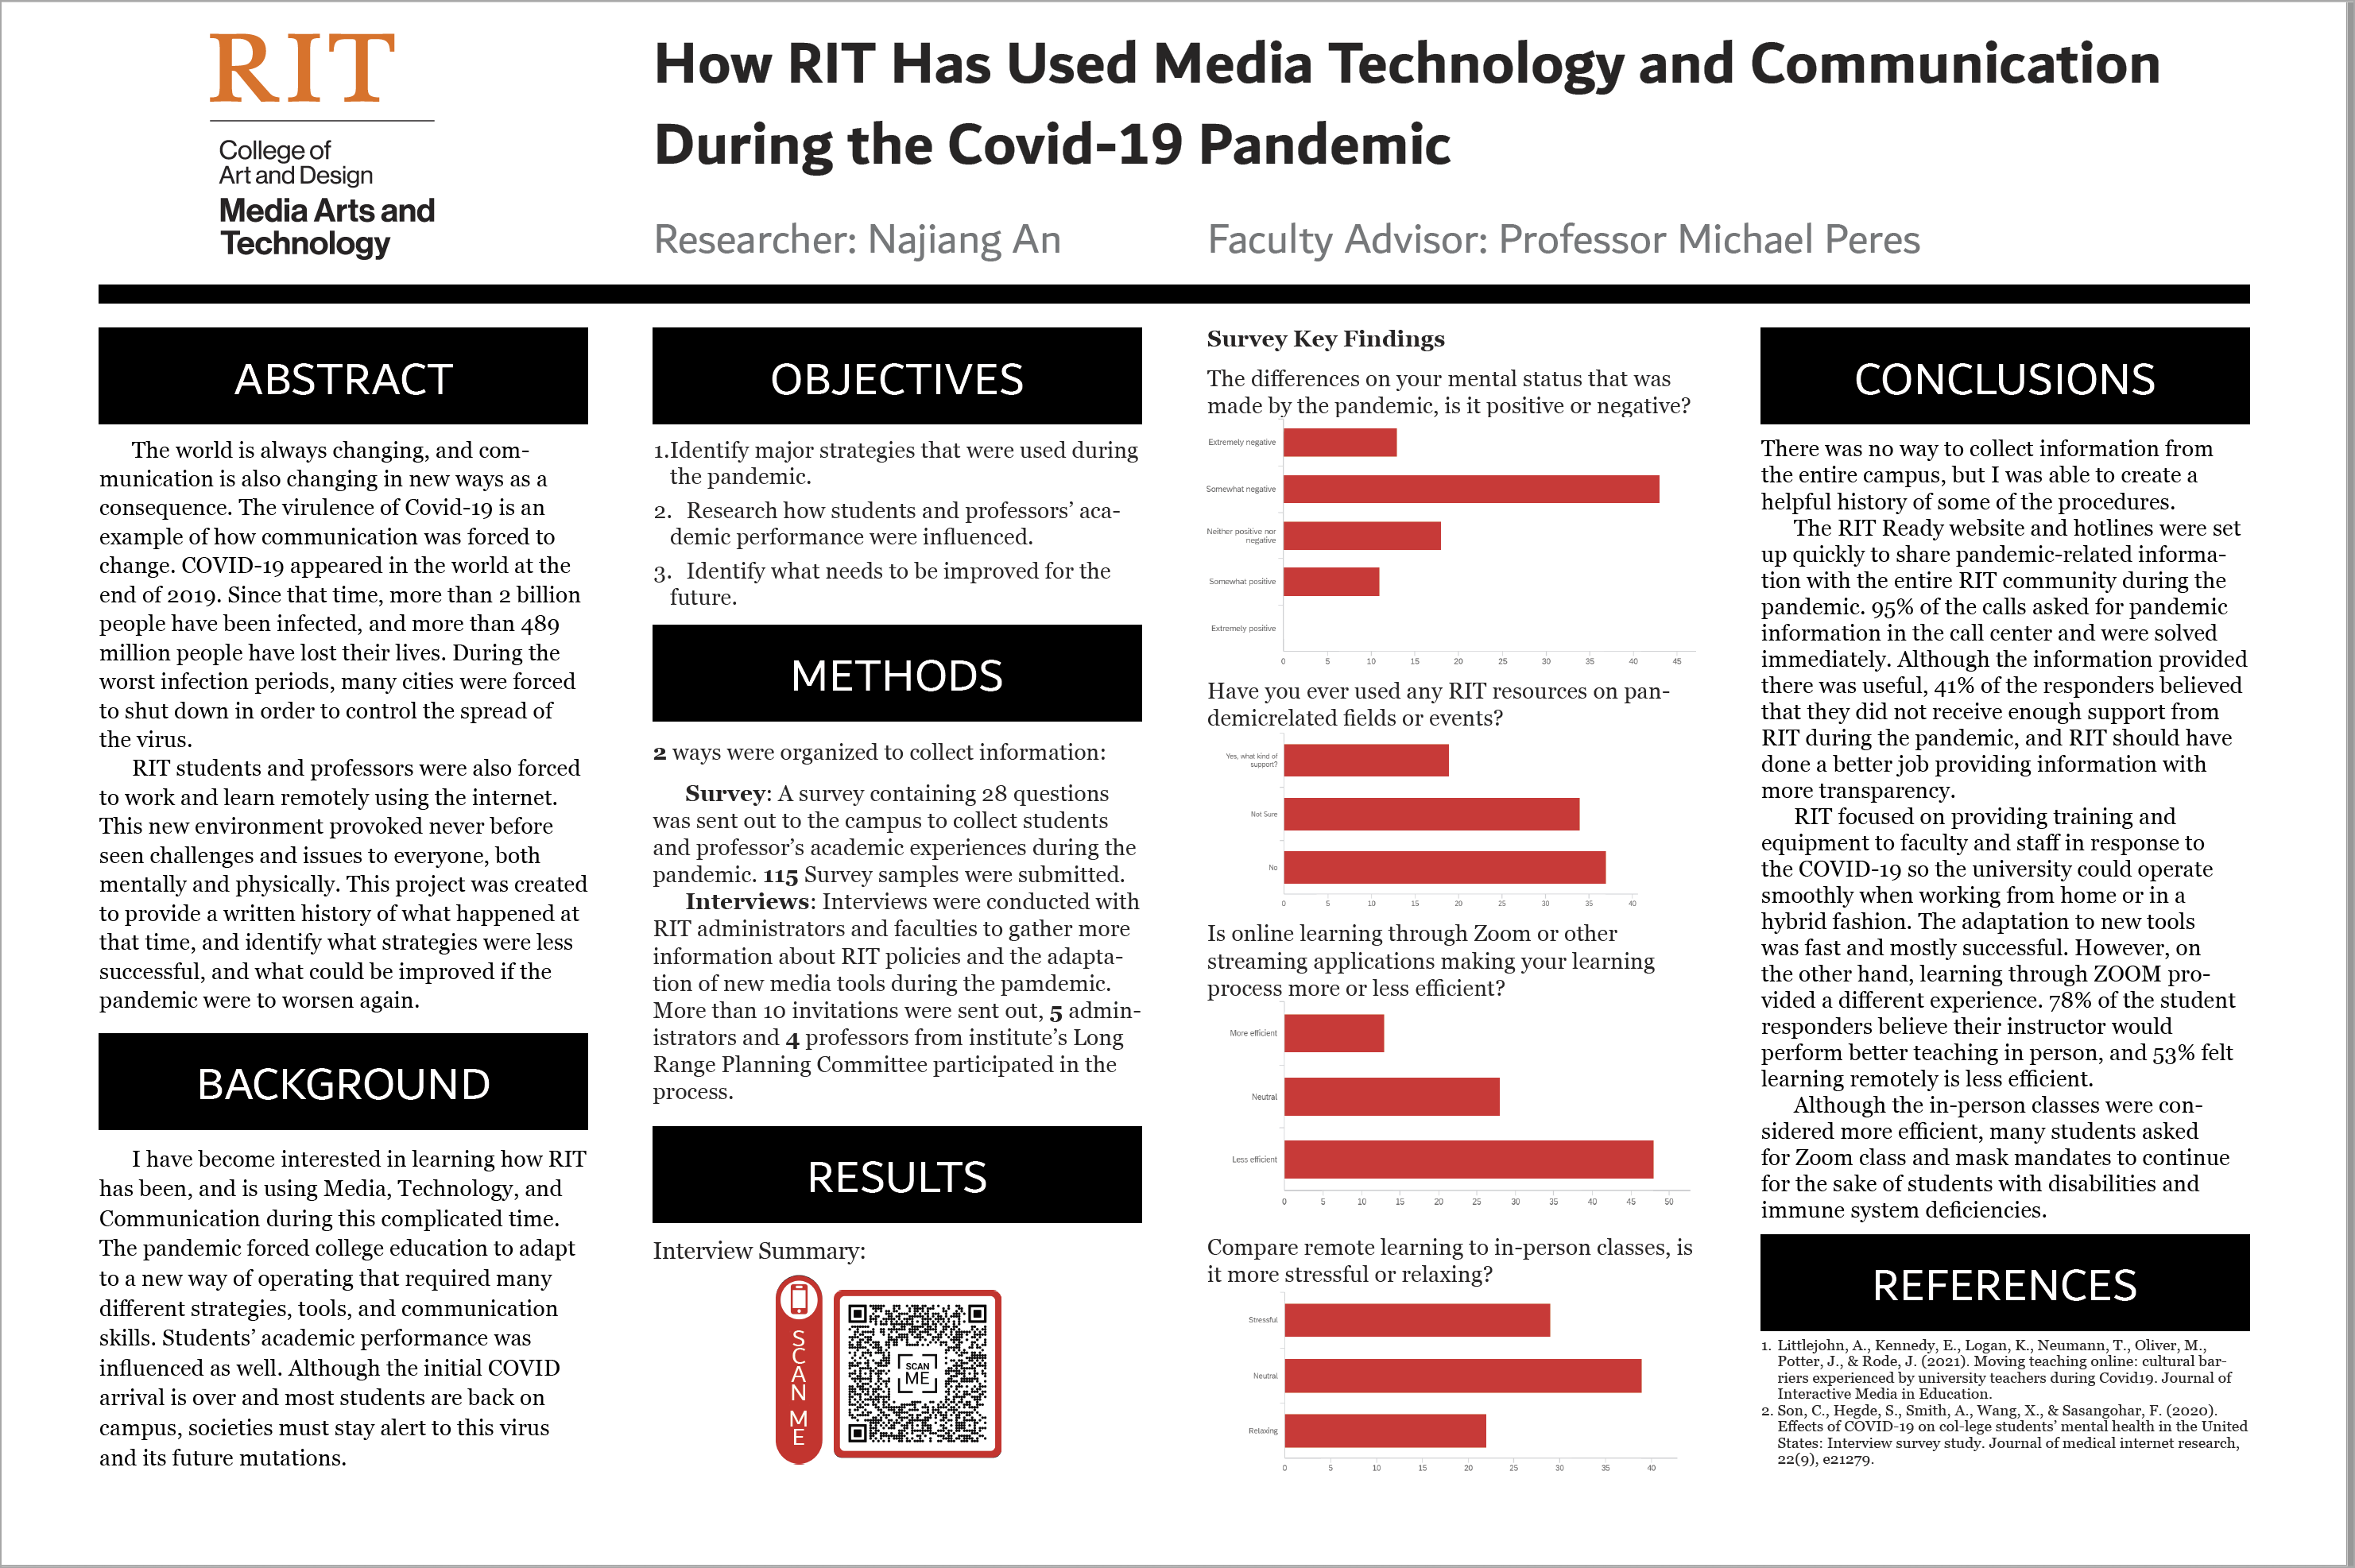 A poster highlighting research on how RIT used media technology and communication during the pandemic.